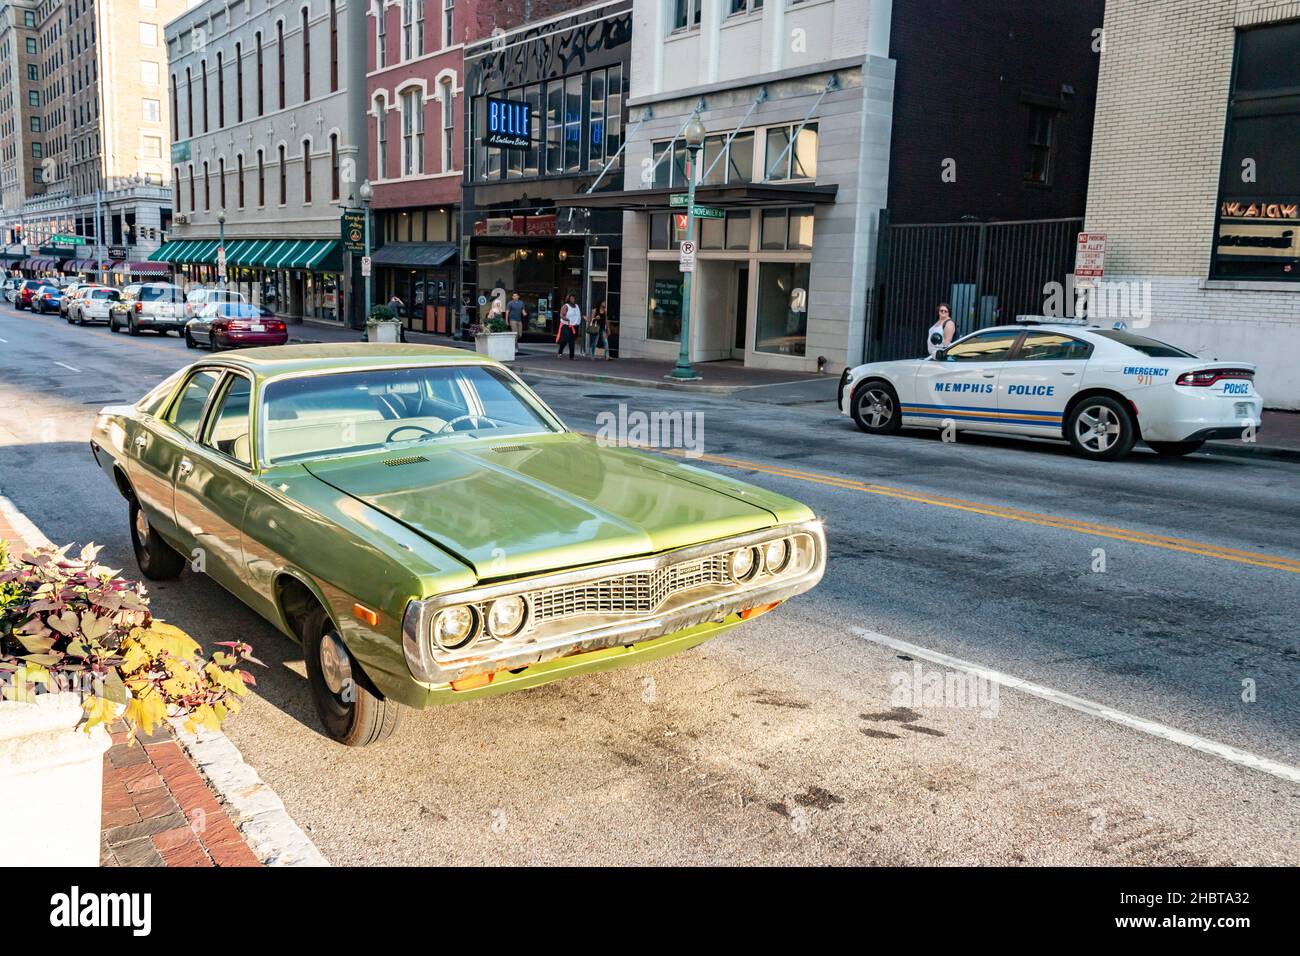 1972 1973 dodge coronet in street in Memphis tennessee Stock Photo